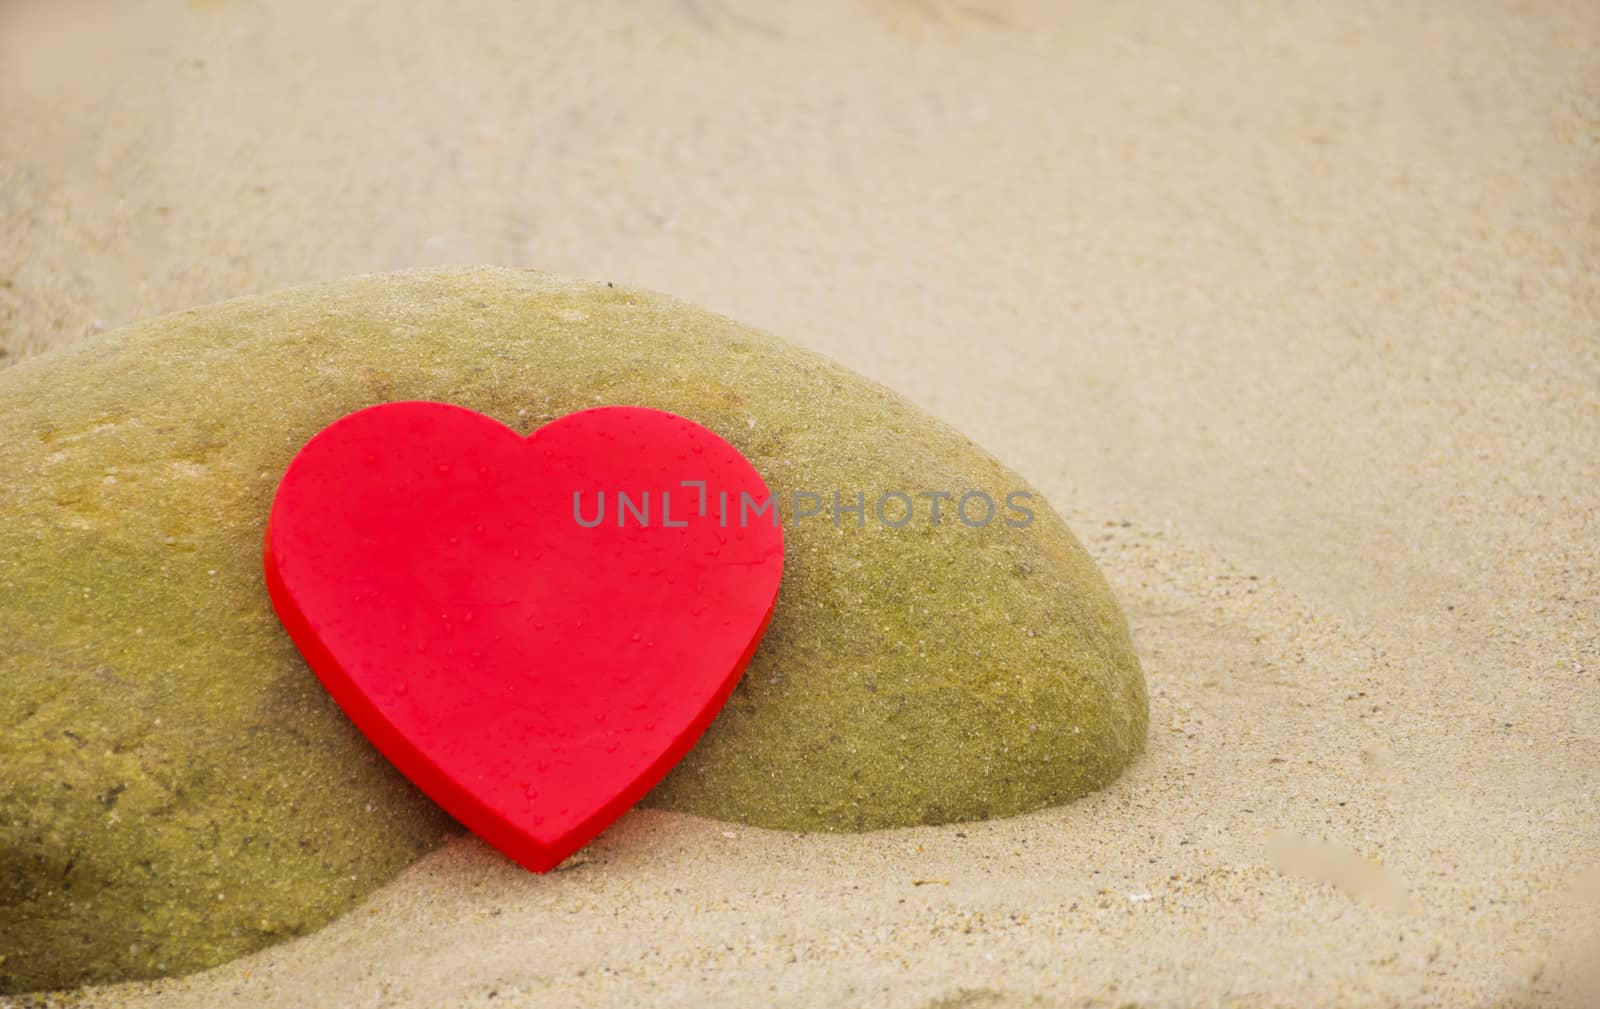 Red Heart shape by the rock on sandy beach